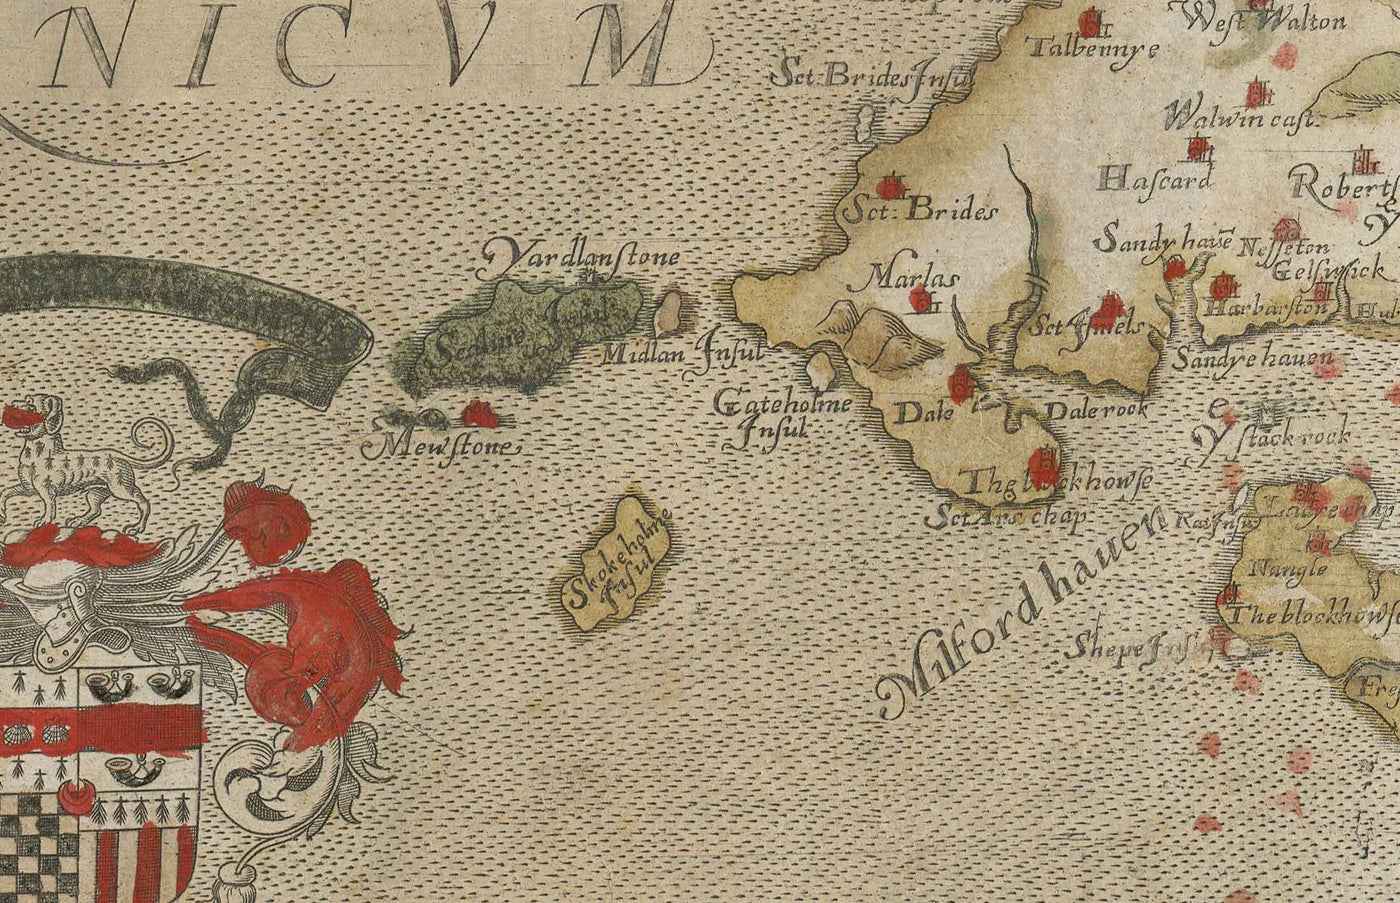 Old Map of Pembrokeshire, Wales in 1578 by Christopher Saxton - Pembroke, Newport, Cardigan, Fishguard, Haverfordwest